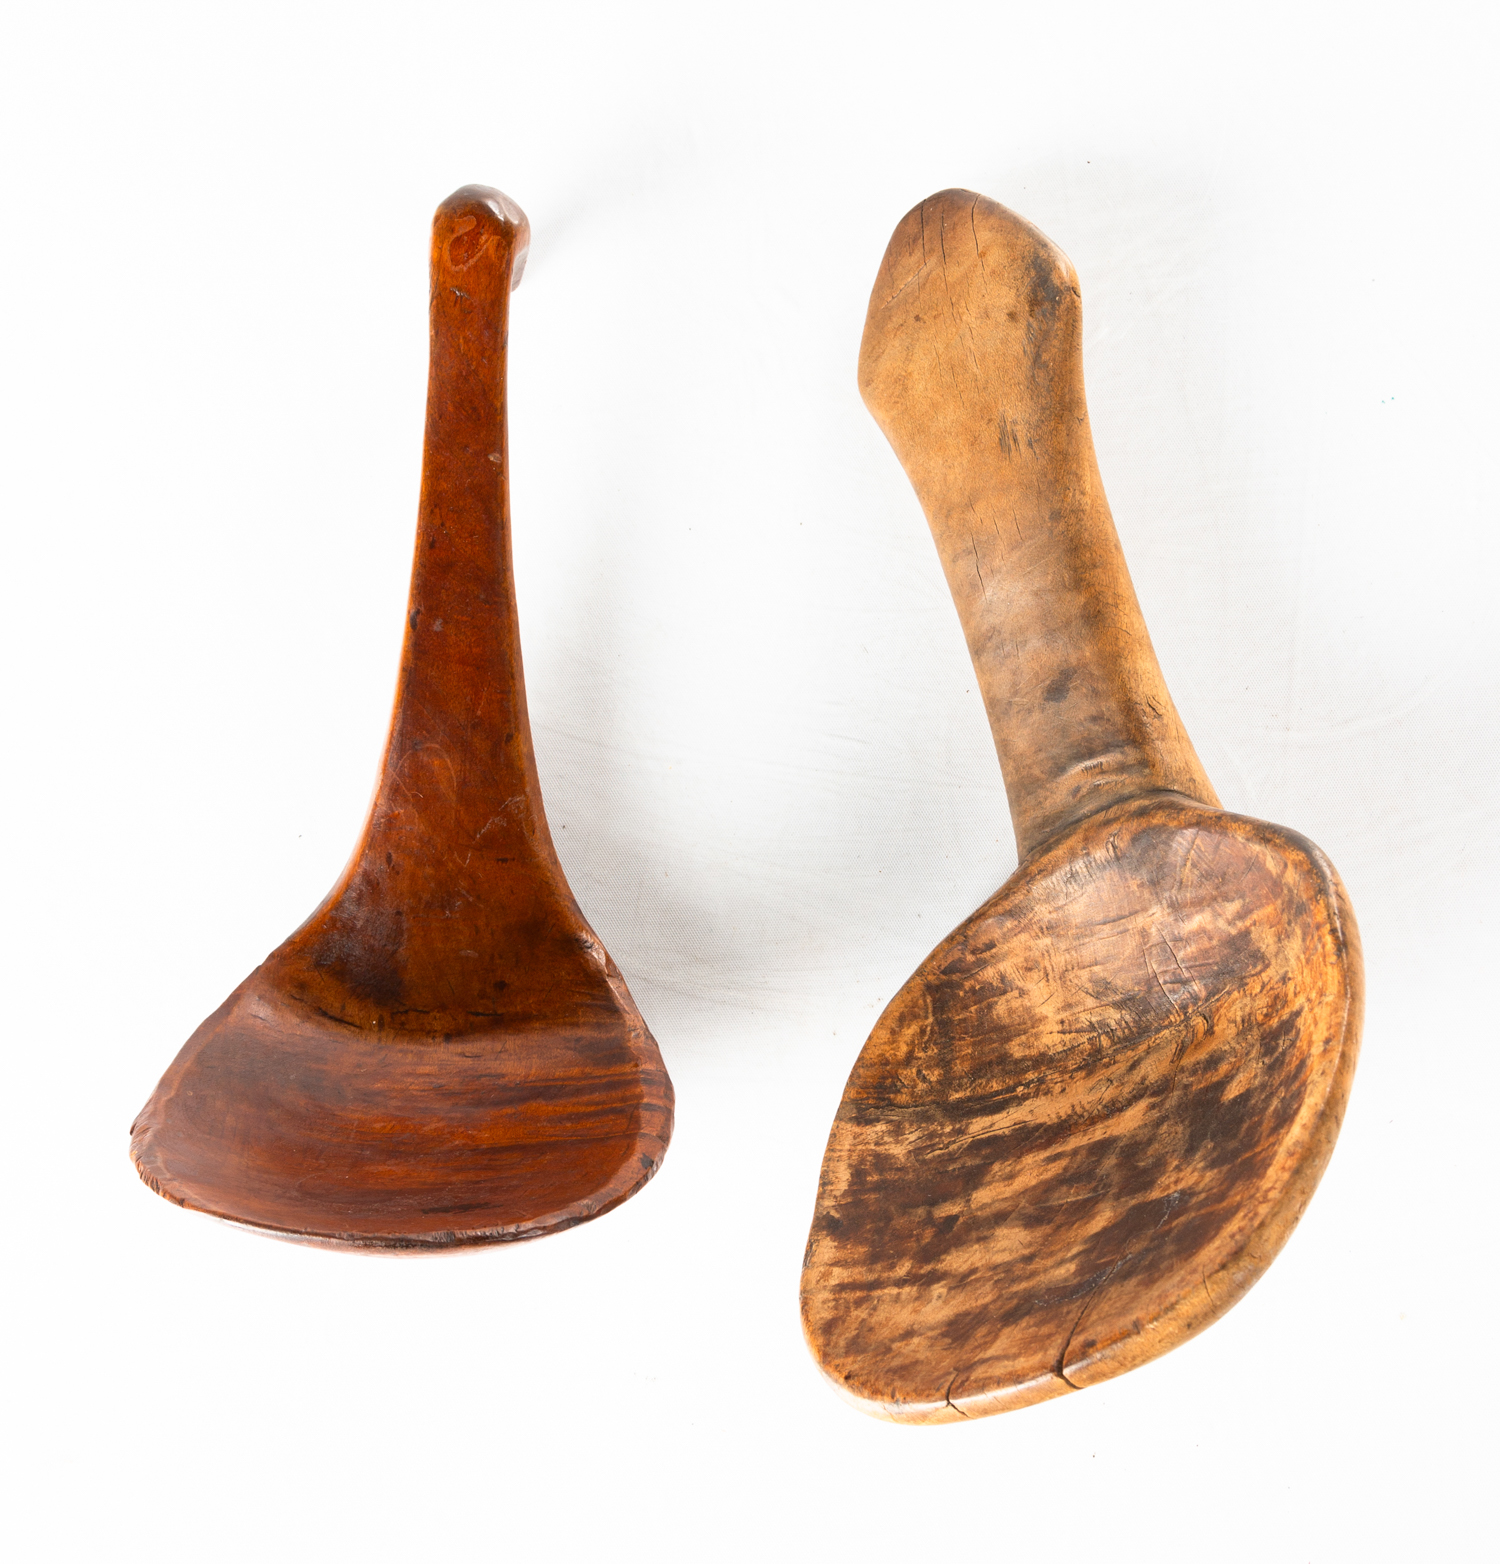 TWO NATIVE AMERICAN EFFIGY LADLES 19th